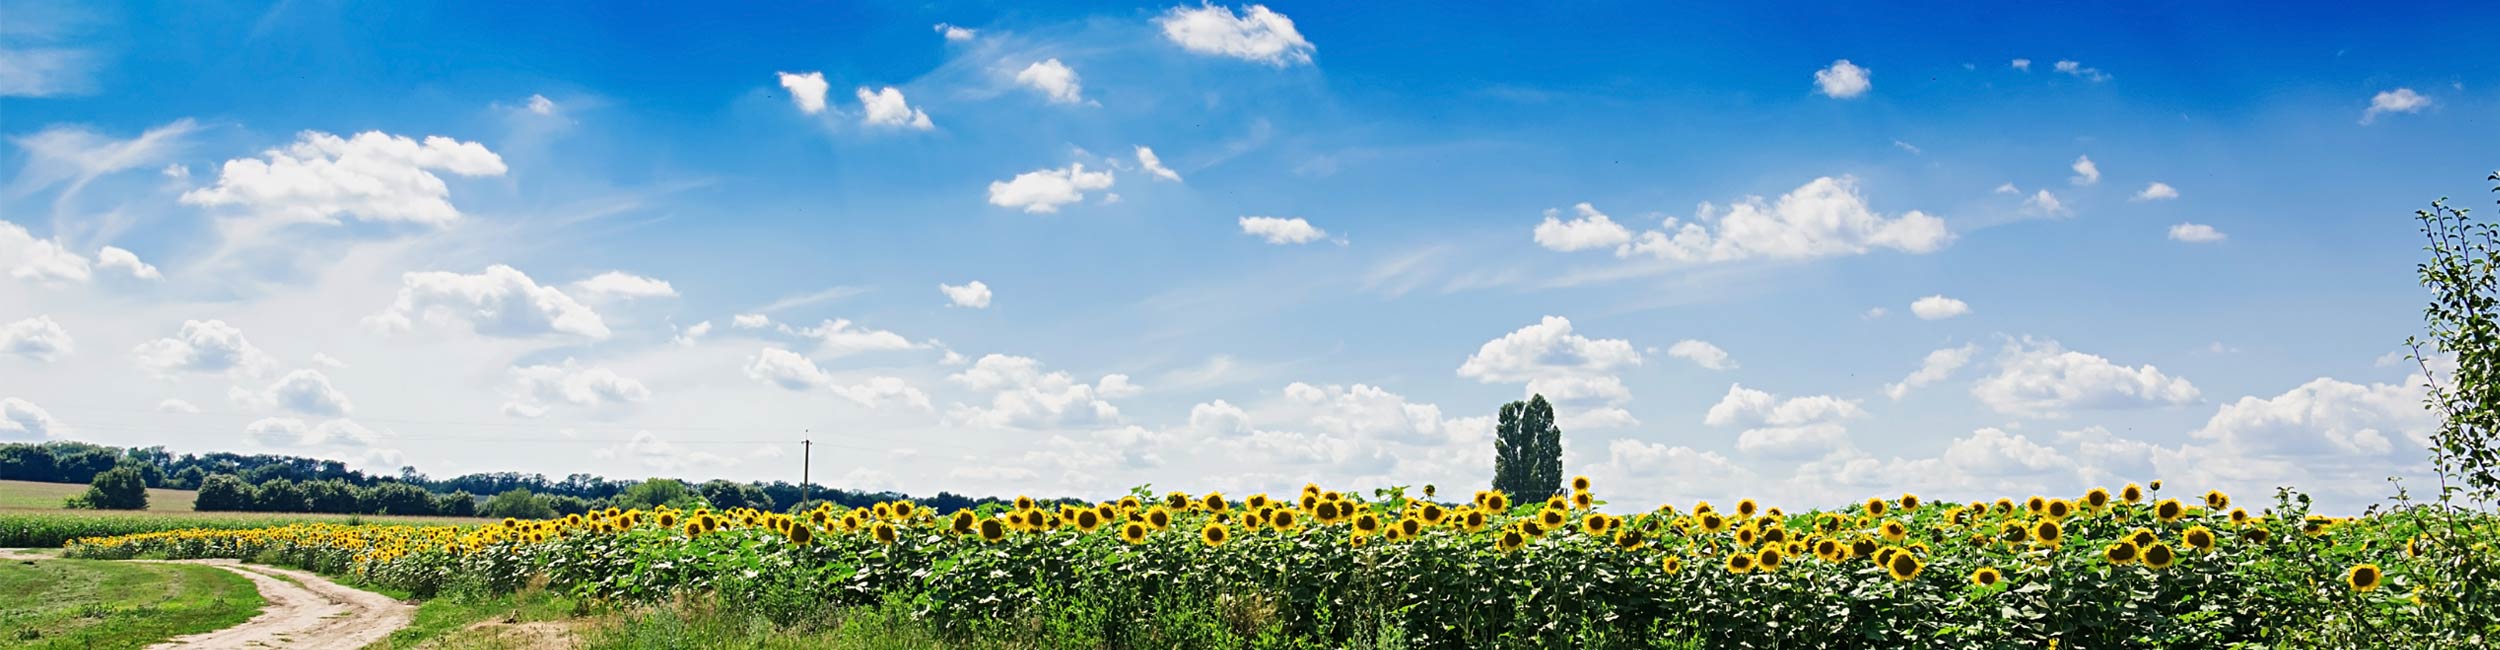 Summer landscape of sunflowers and blue skies